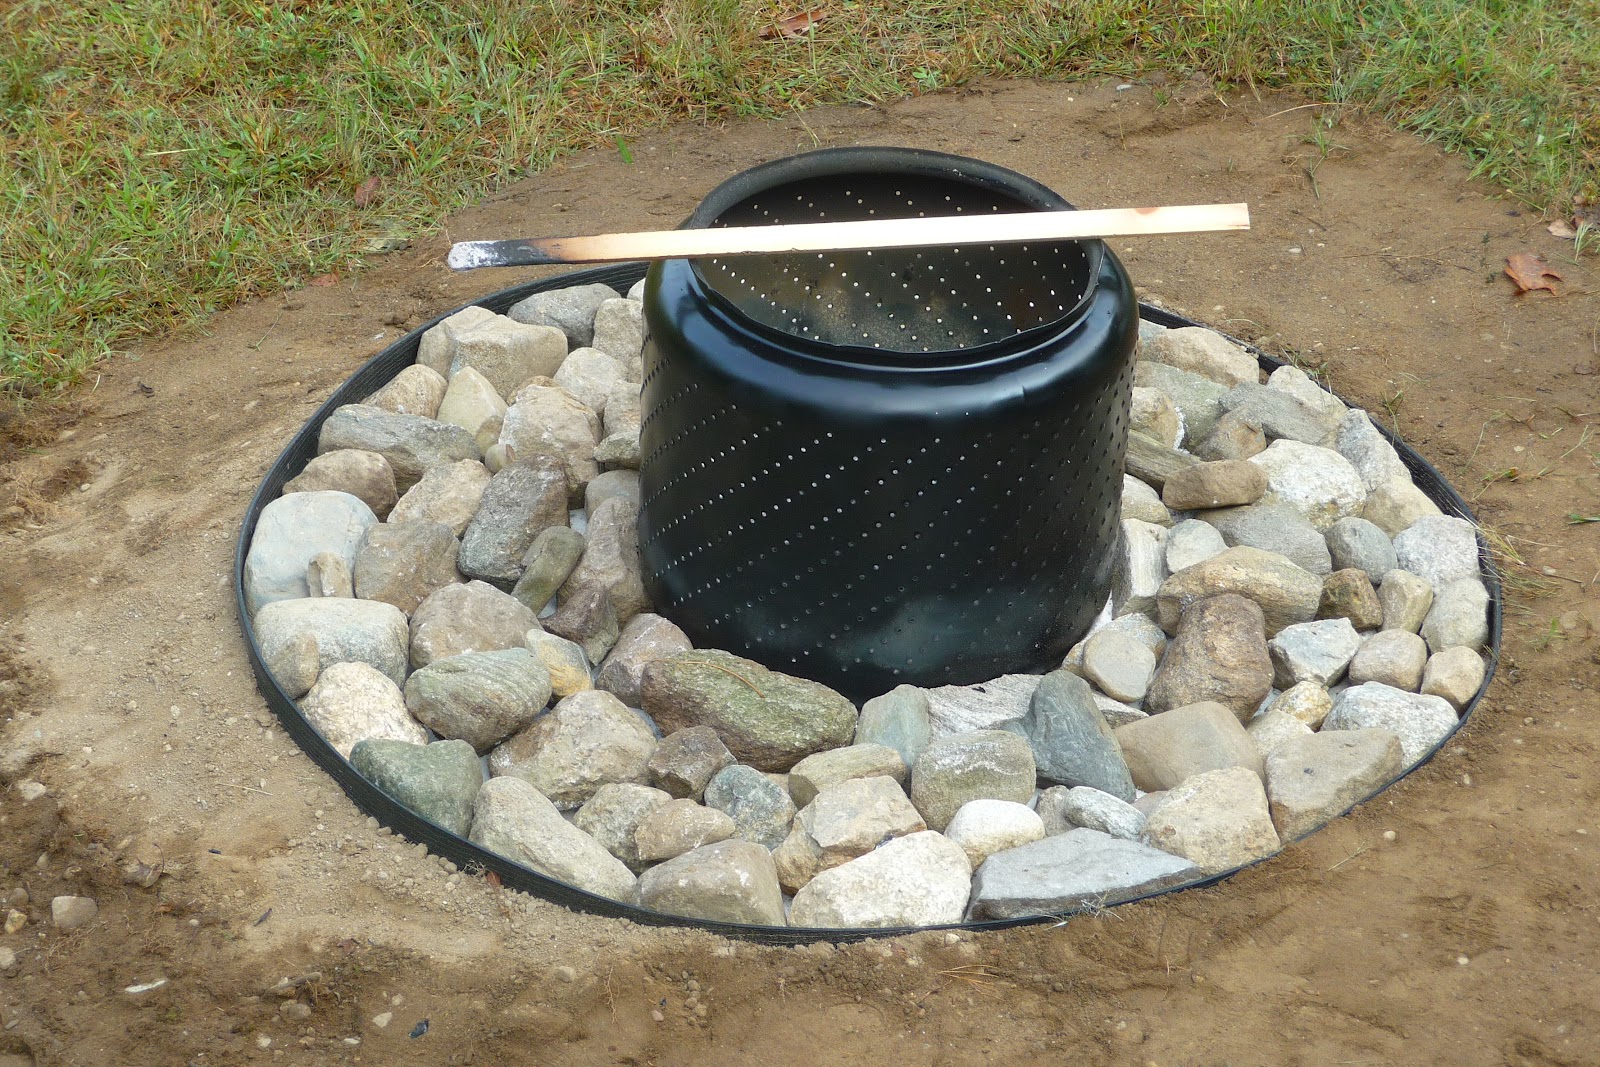 Diy Fire Pit For As Little 0, Washer Tub Fire Pit